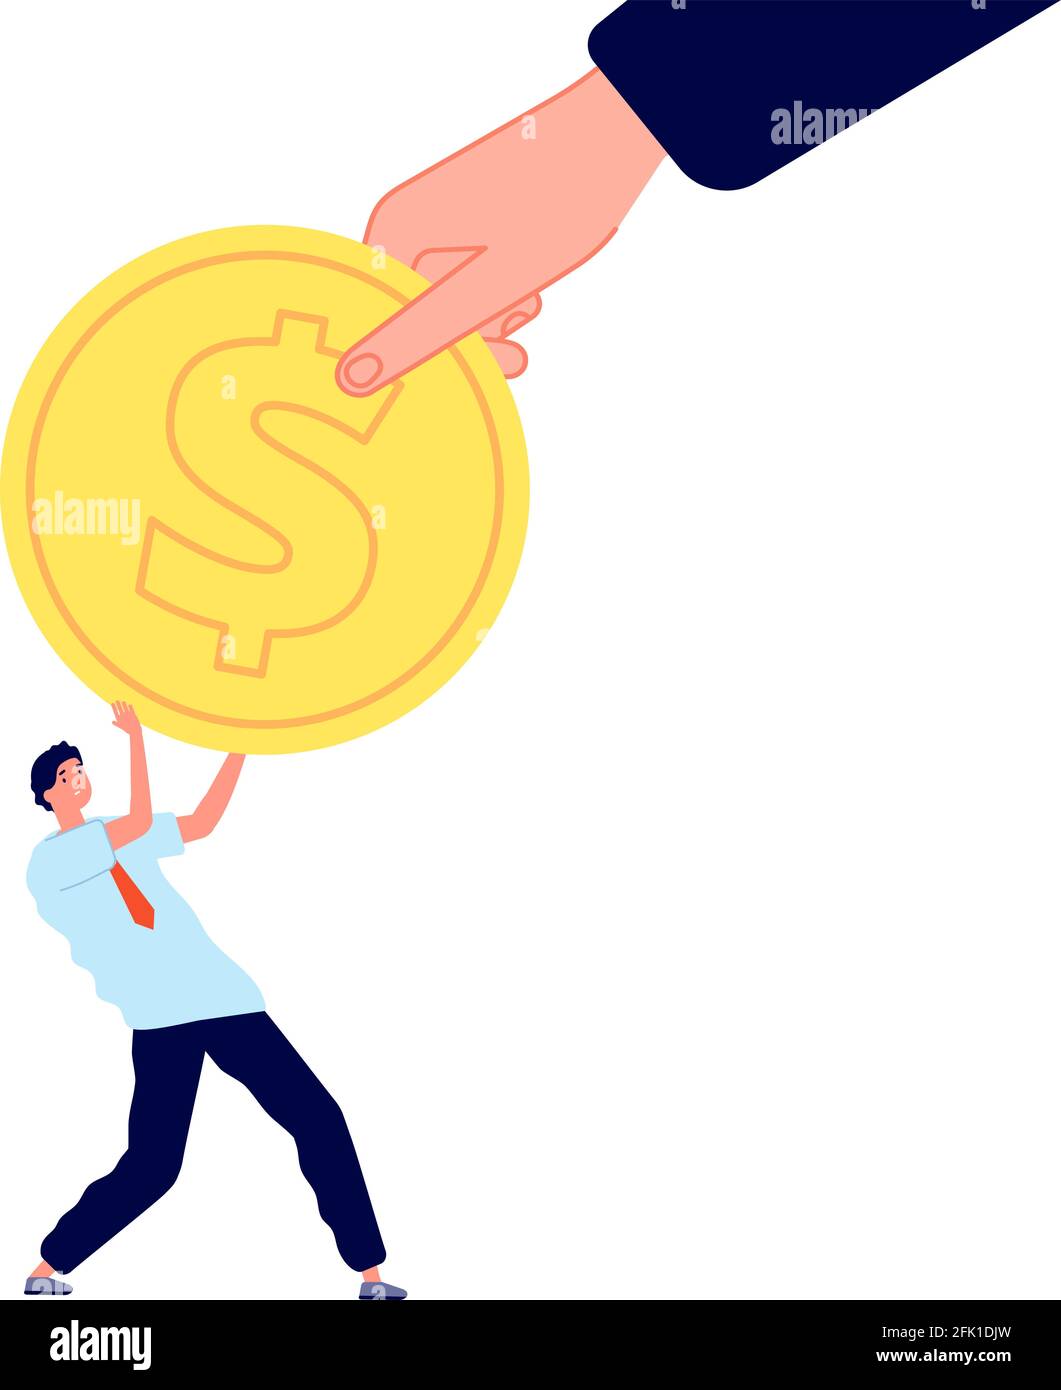 Large investment. Small man, business leadership and financial help. Risk management, loan. Investor hand with gold coin vector illustration Stock Vector